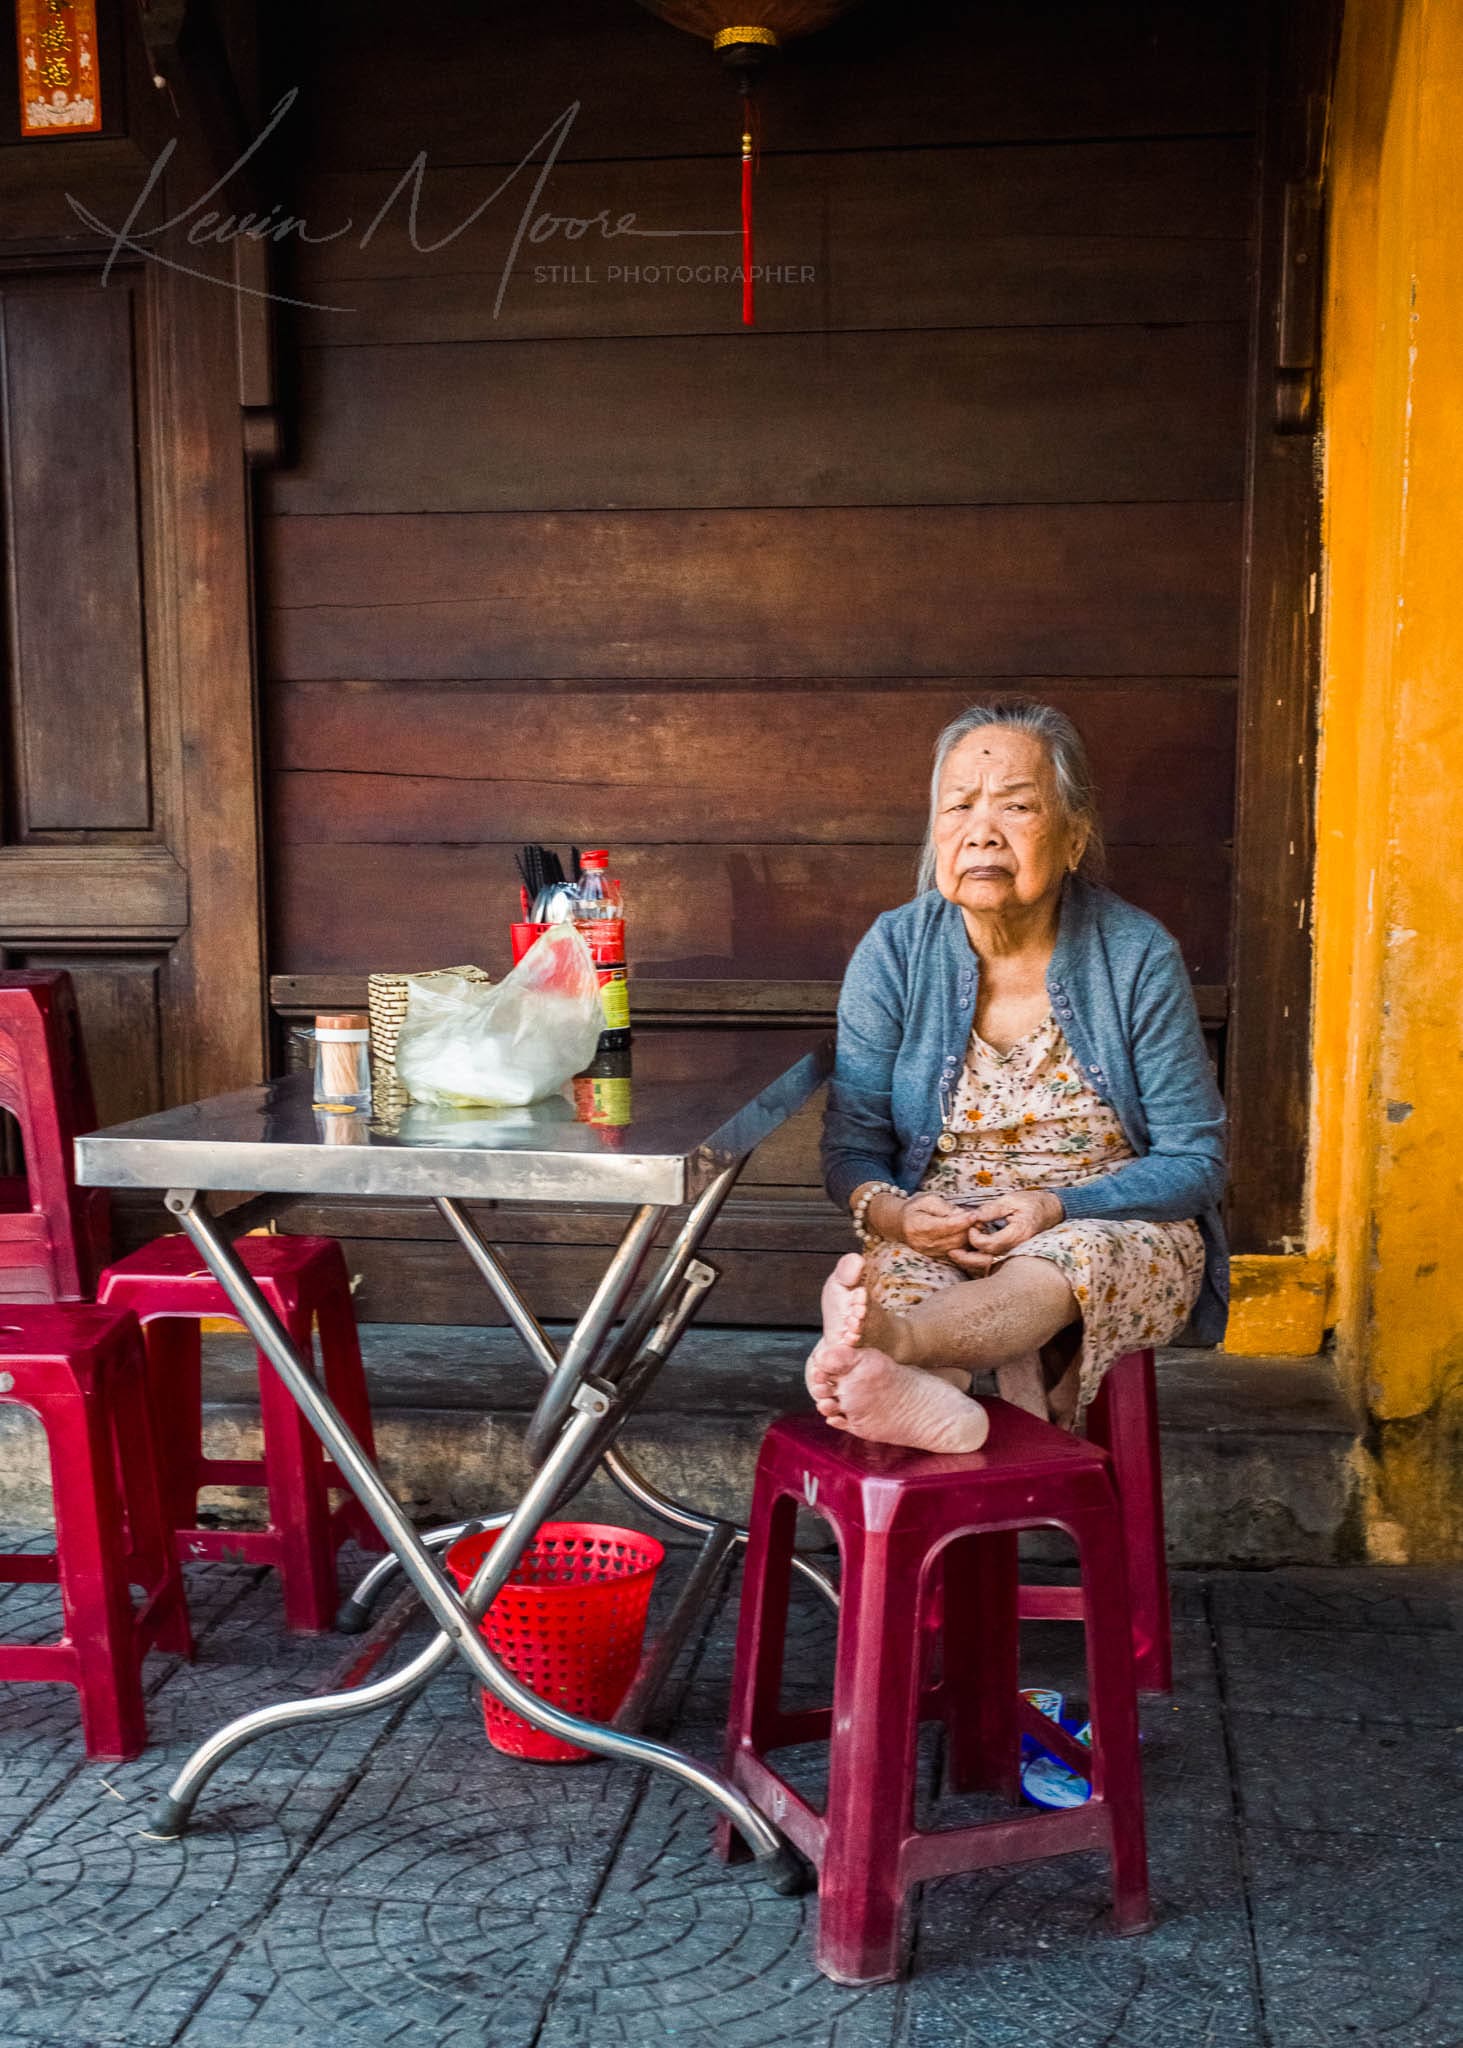 Elderly Vietnamese woman enjoying a peaceful moment in a rustic outdoor eatery during daytime.